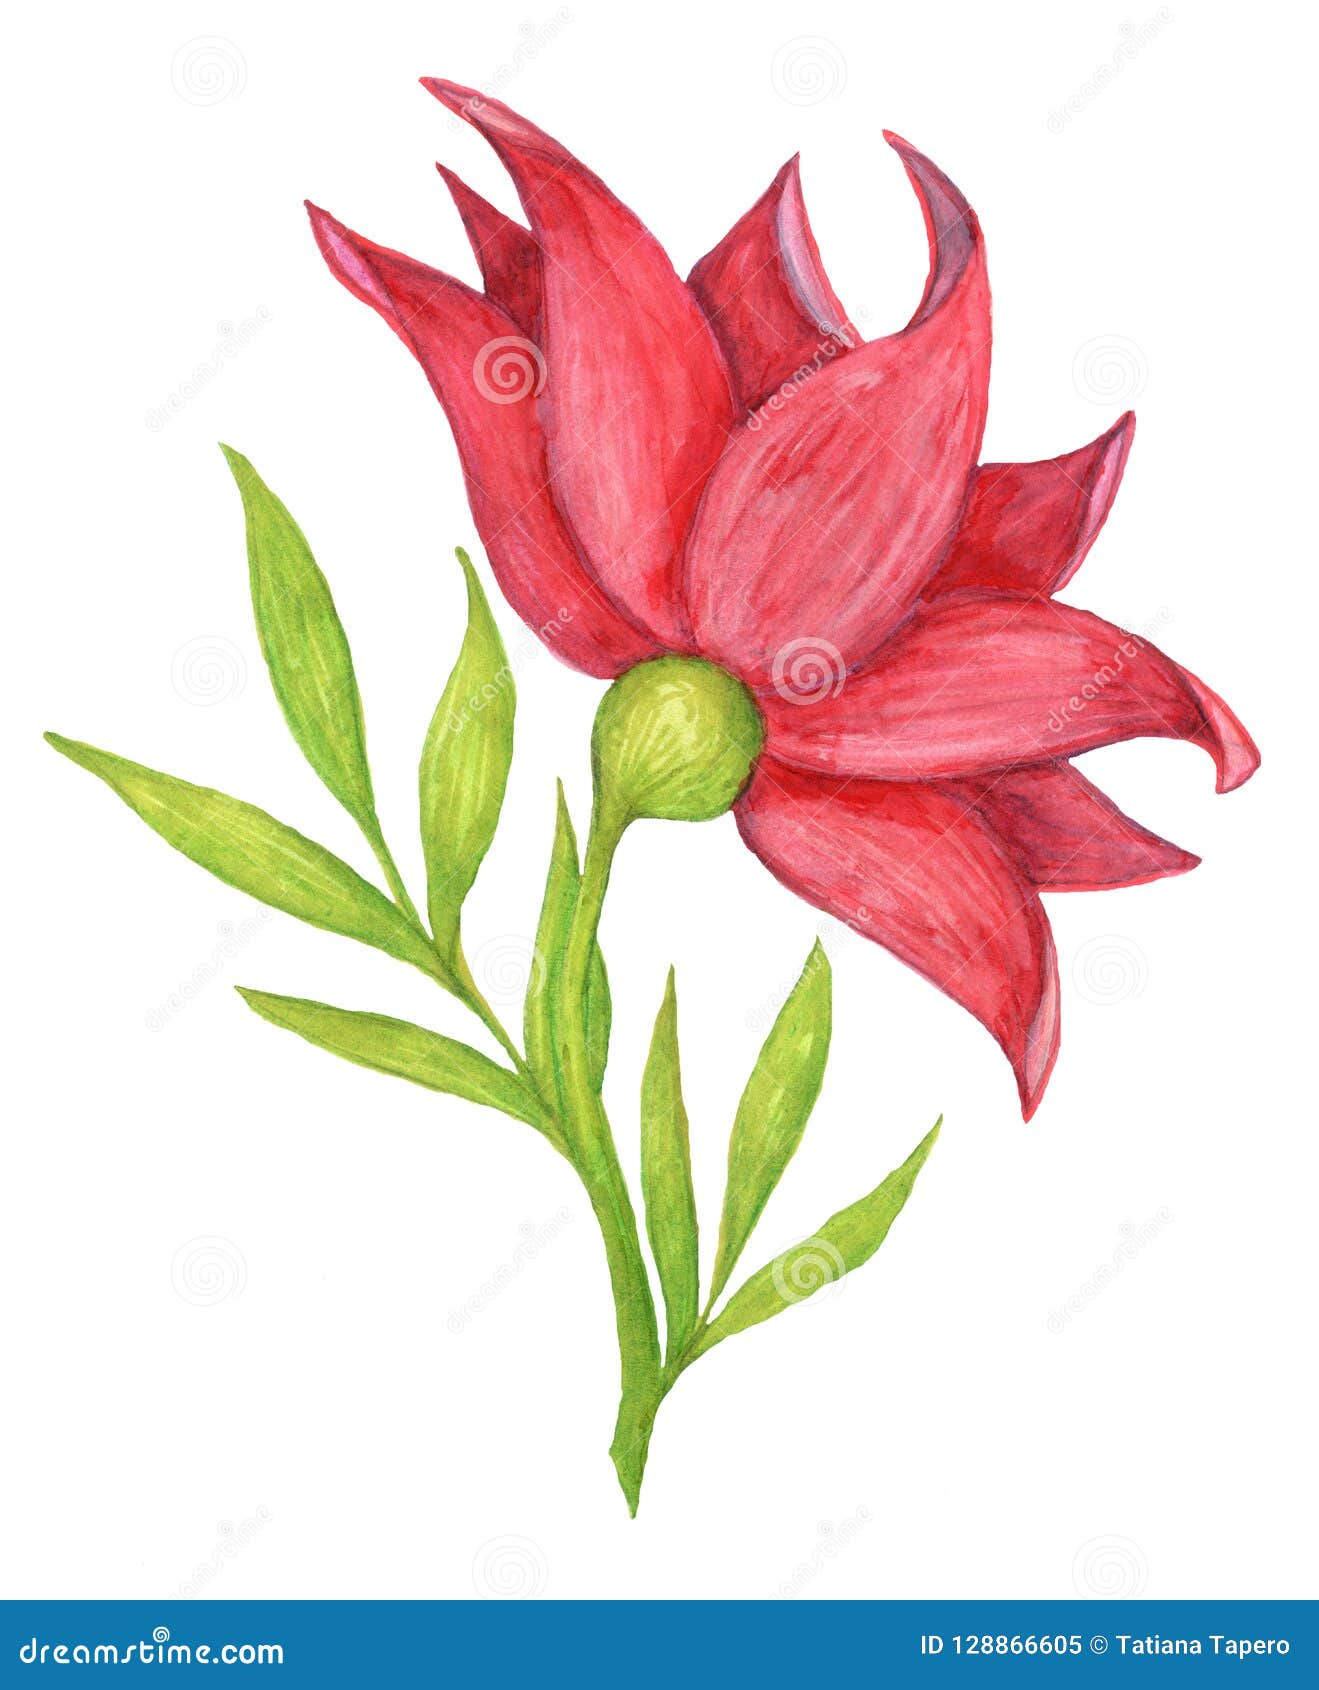 Red Flower Painted On White Background Stock Illustration - Illustration Of Drawn, Painted: 128866605